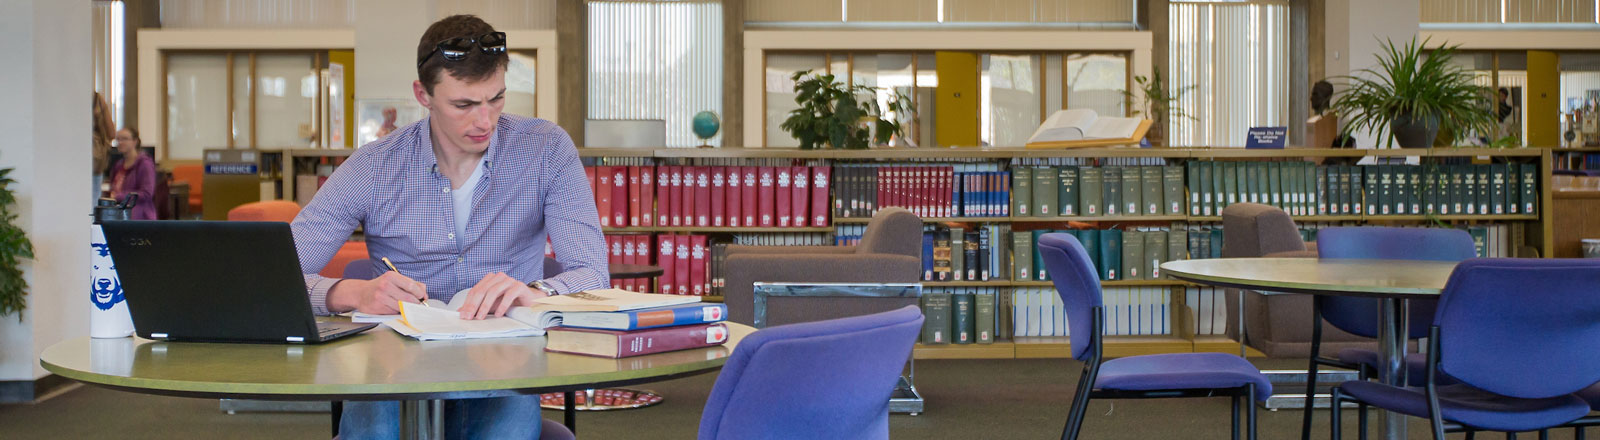 Intensive English Program Student studying in Michener Library